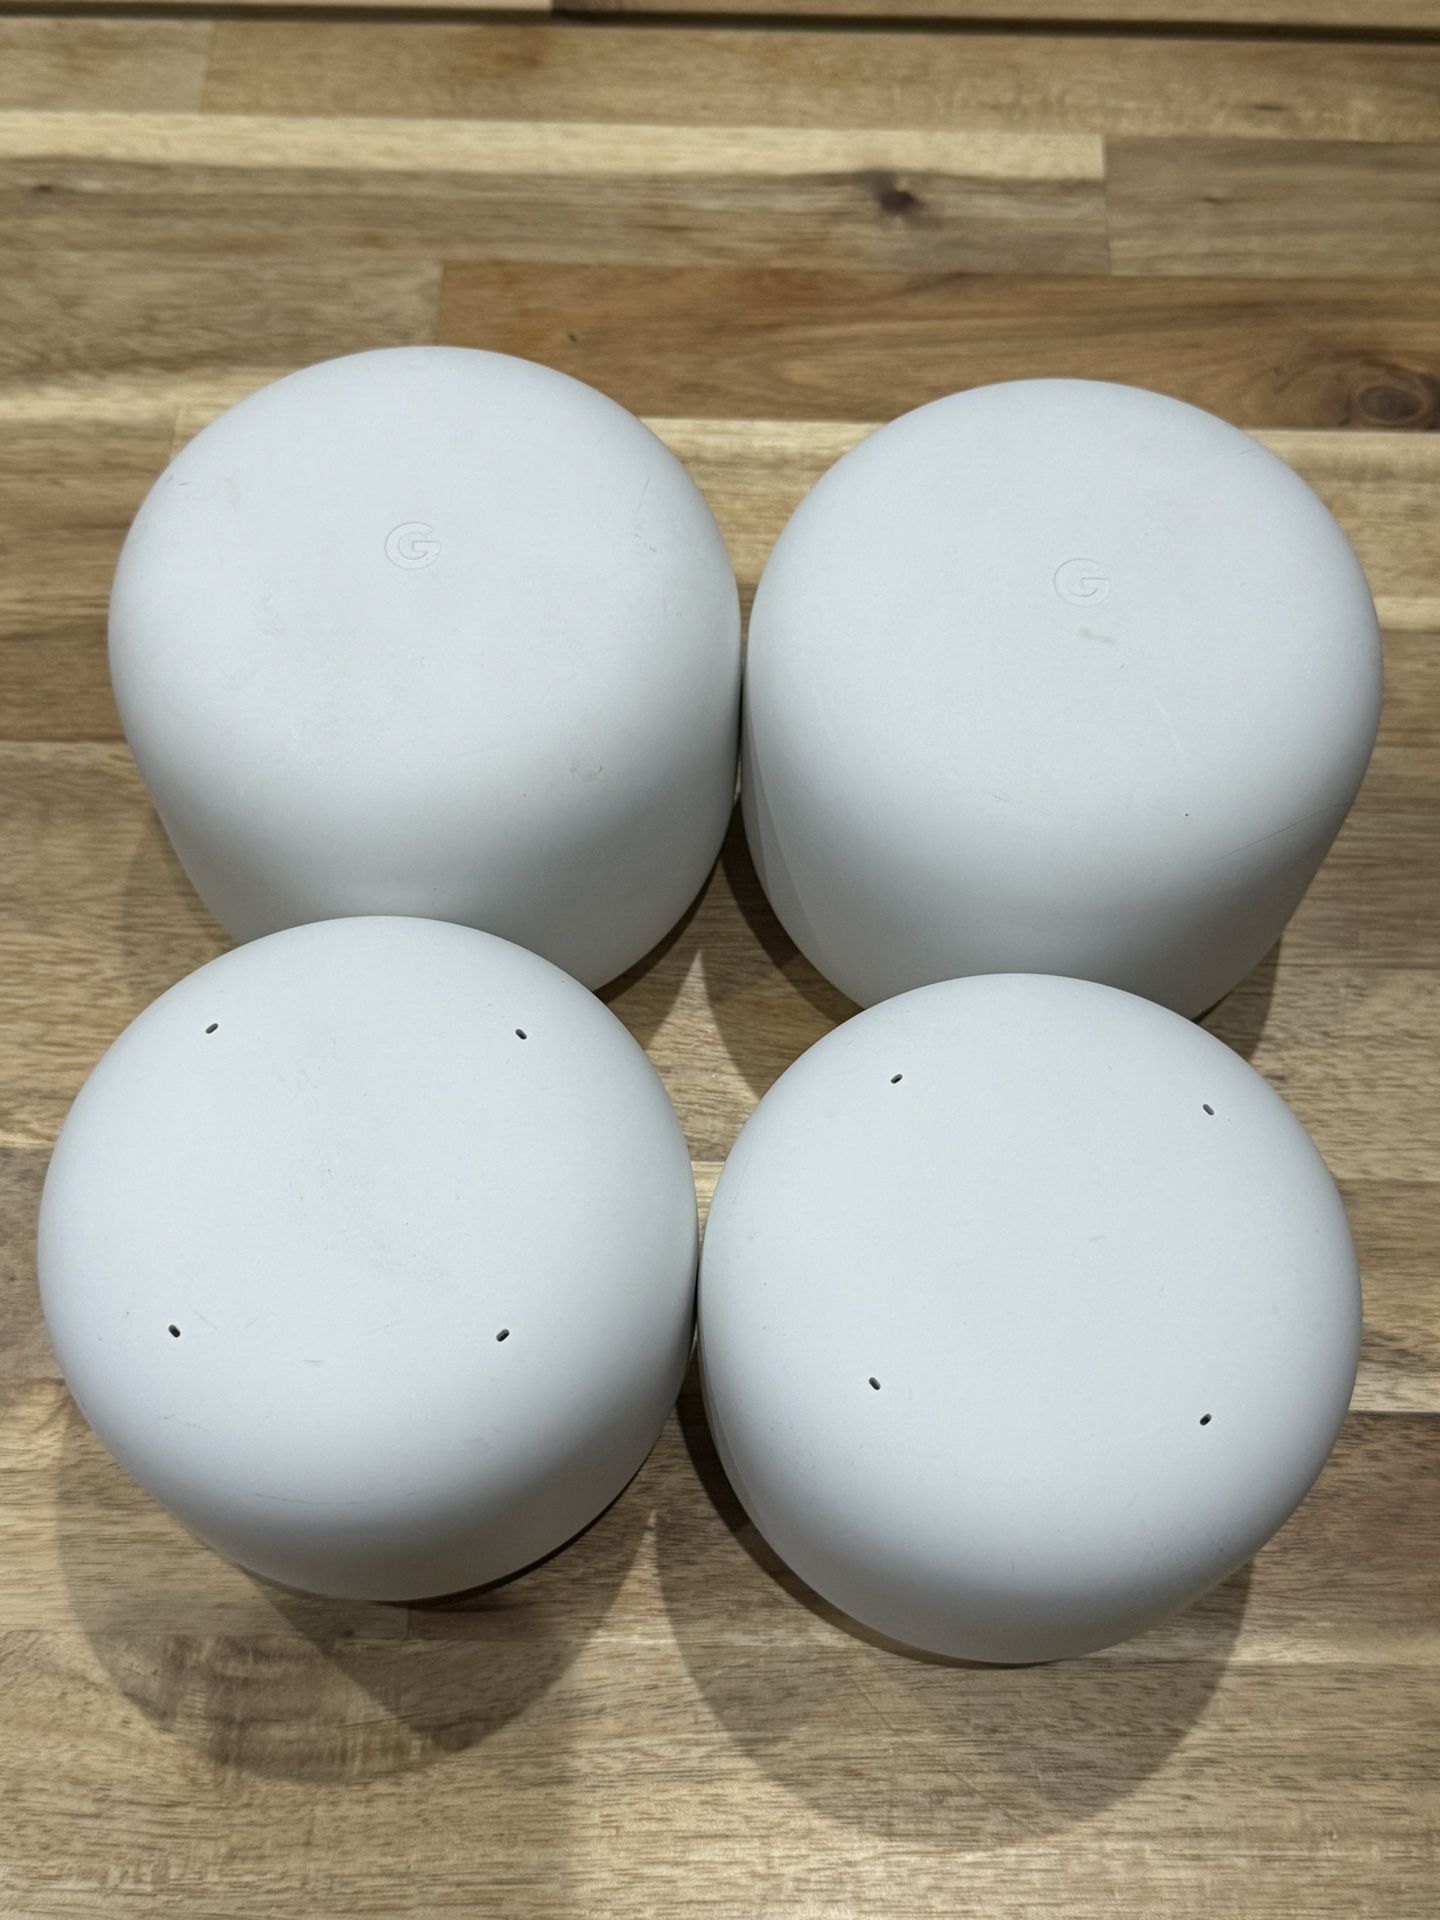 Google Mesh WiFi Routers